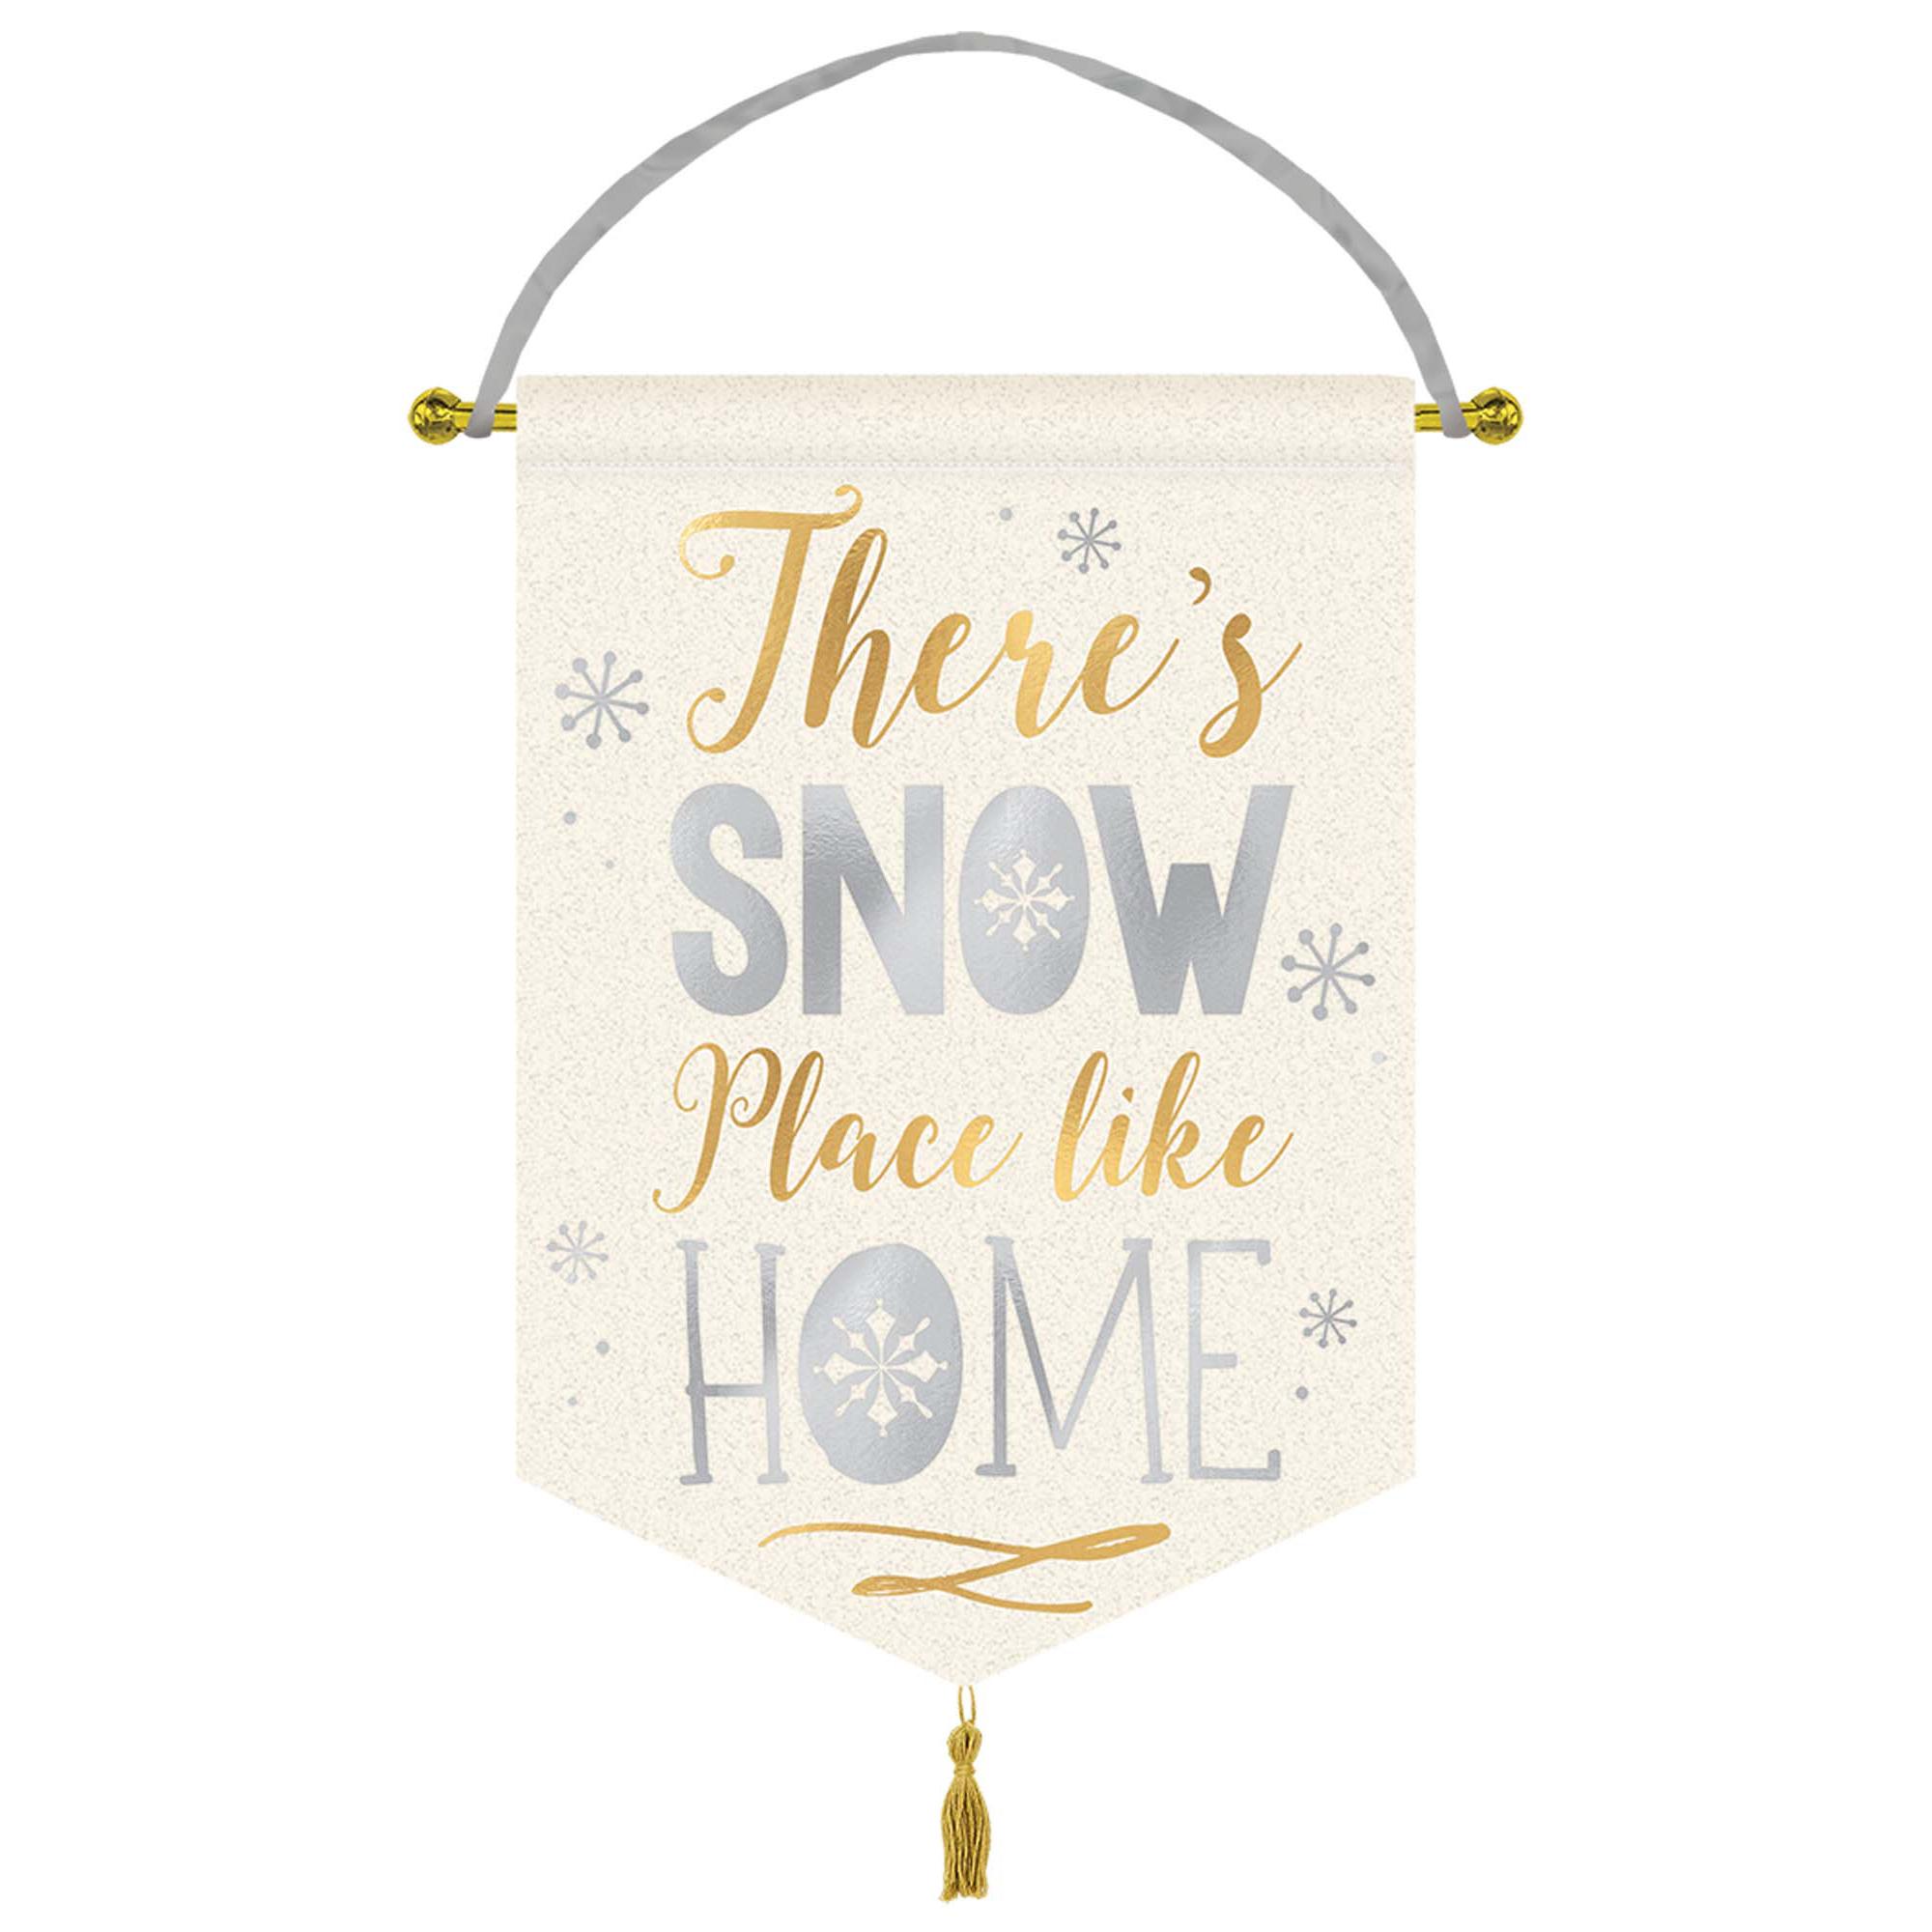 Theres Snow Place Like Home Hanging Decoration Decorations - Party Centre